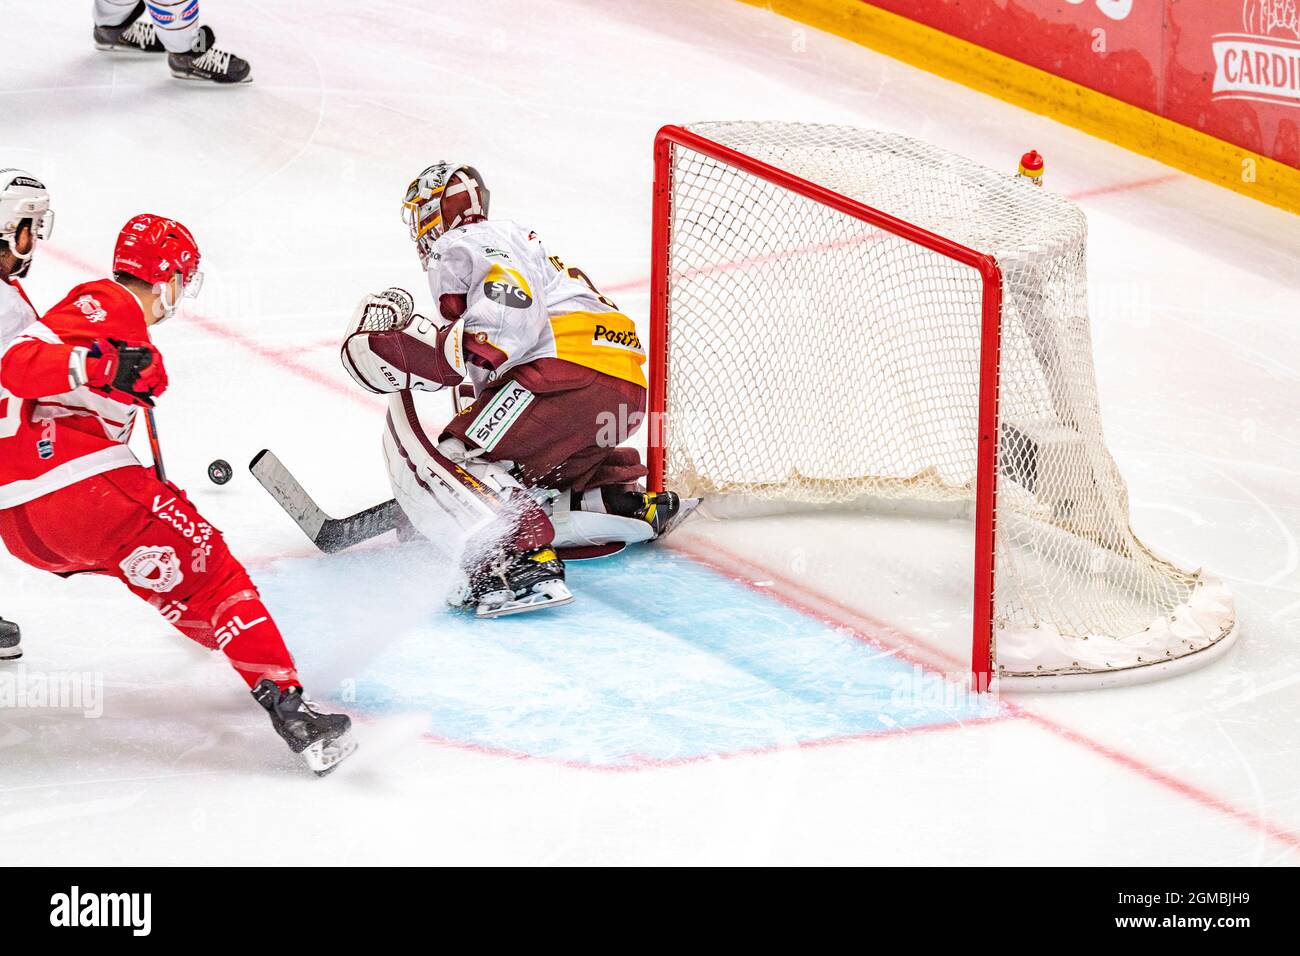 Lausanne, Switzerland. 09th July, 2021. Gauthier Descloux (goalkeeper) of Geneva-Servette Hc is in action during the 5th match of the 2021-2022 Swiss National League Season with the Lausanne Hc and Geneva-Servette Hc (Photo by Eric Dubost/Pacific Press) Credit: Pacific Press Media Production Corp./Alamy Live News Stock Photo